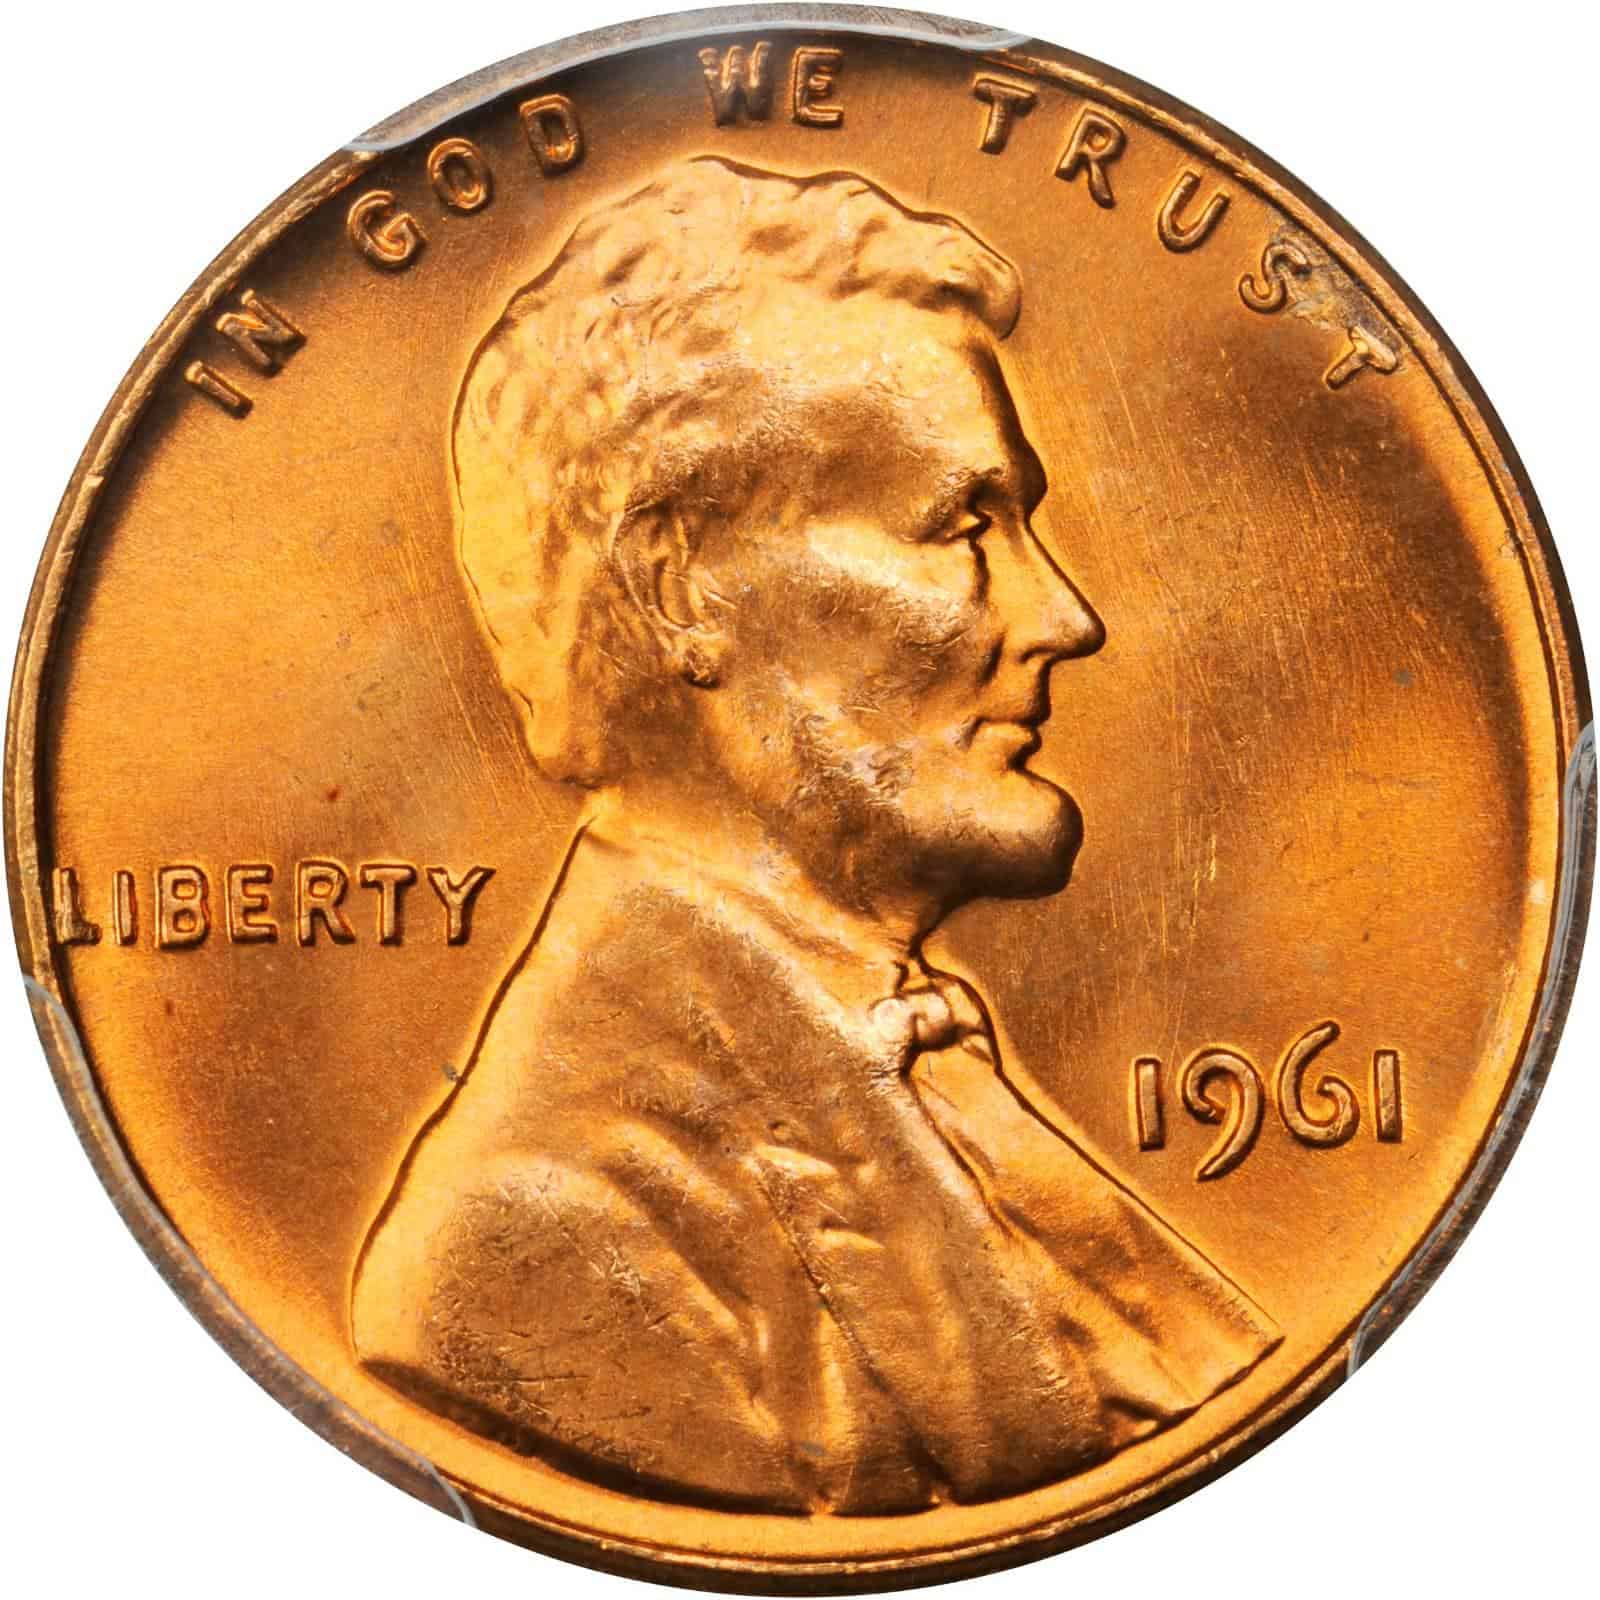 The obverse of the 1961 Lincoln Memorial penny